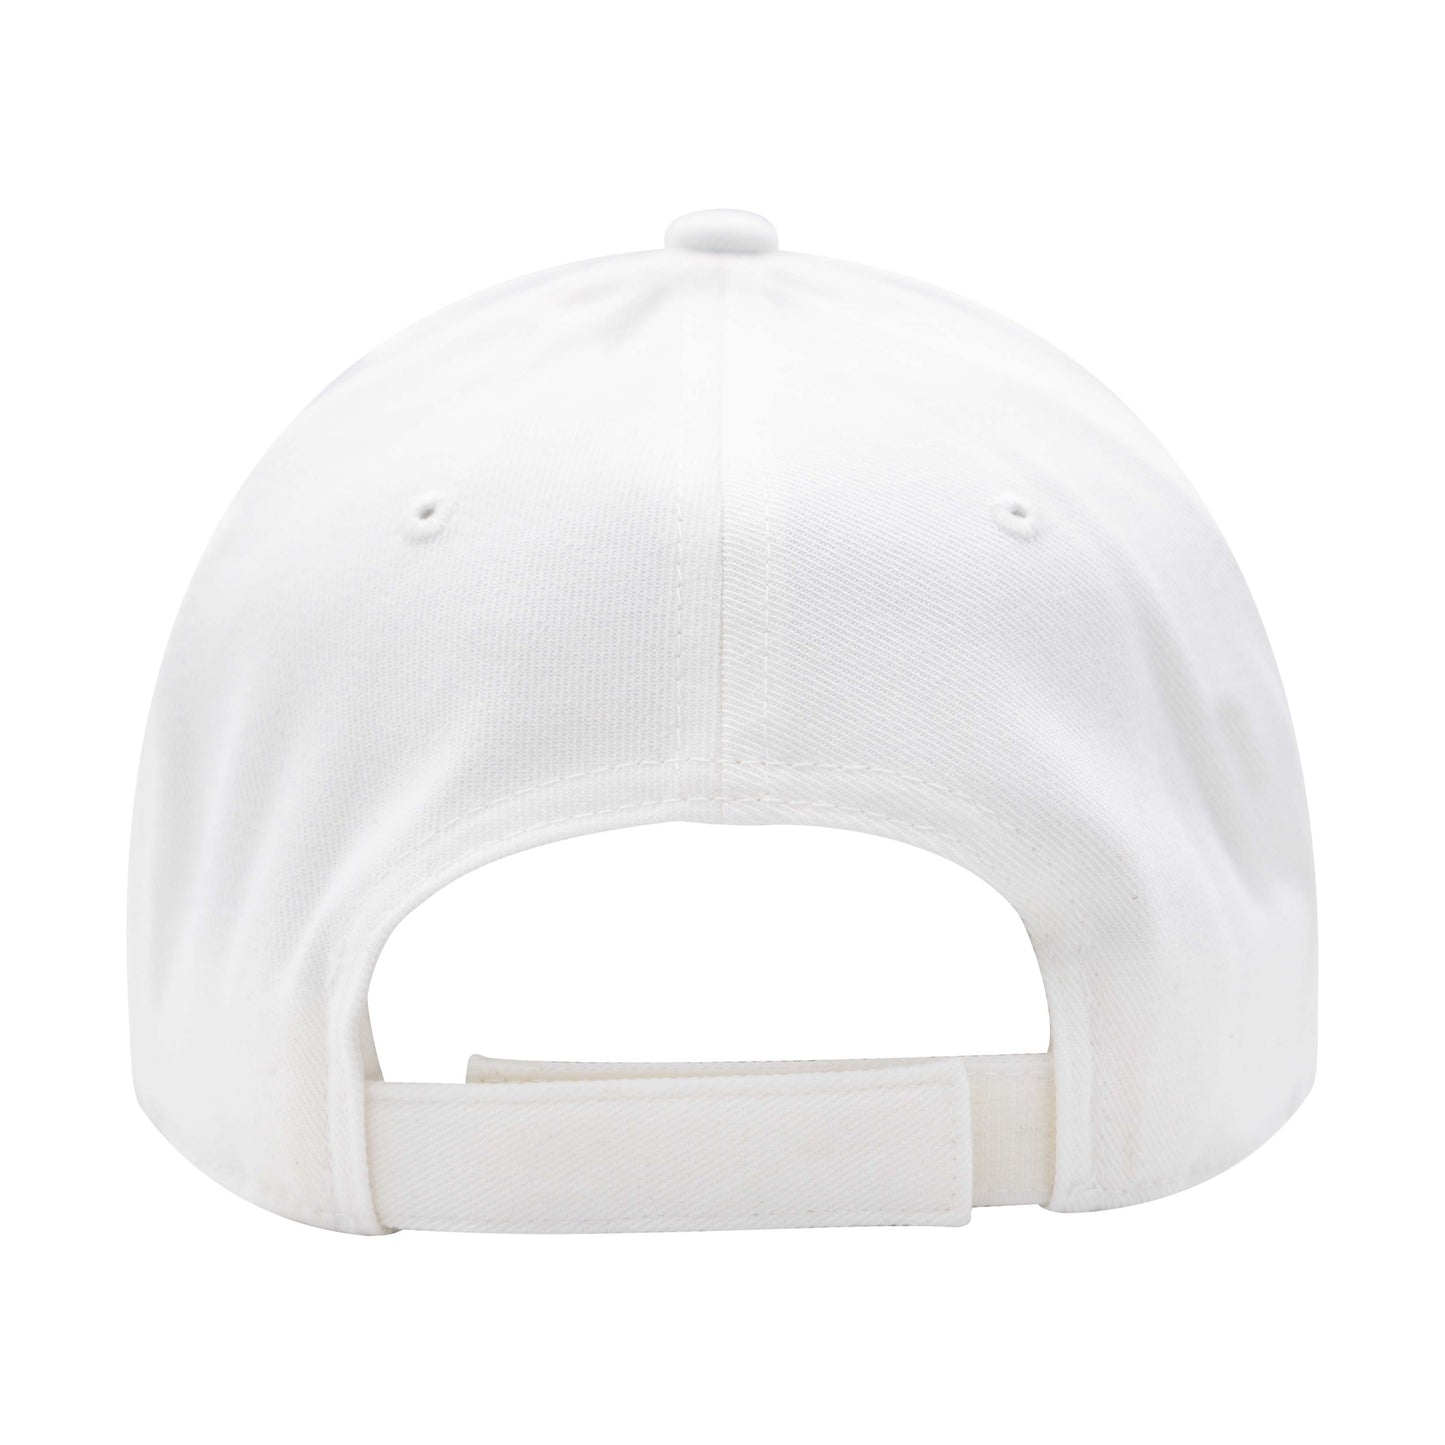 NLU Spring Airline ProFormance Hat | White w/ Green & Yellow Patch